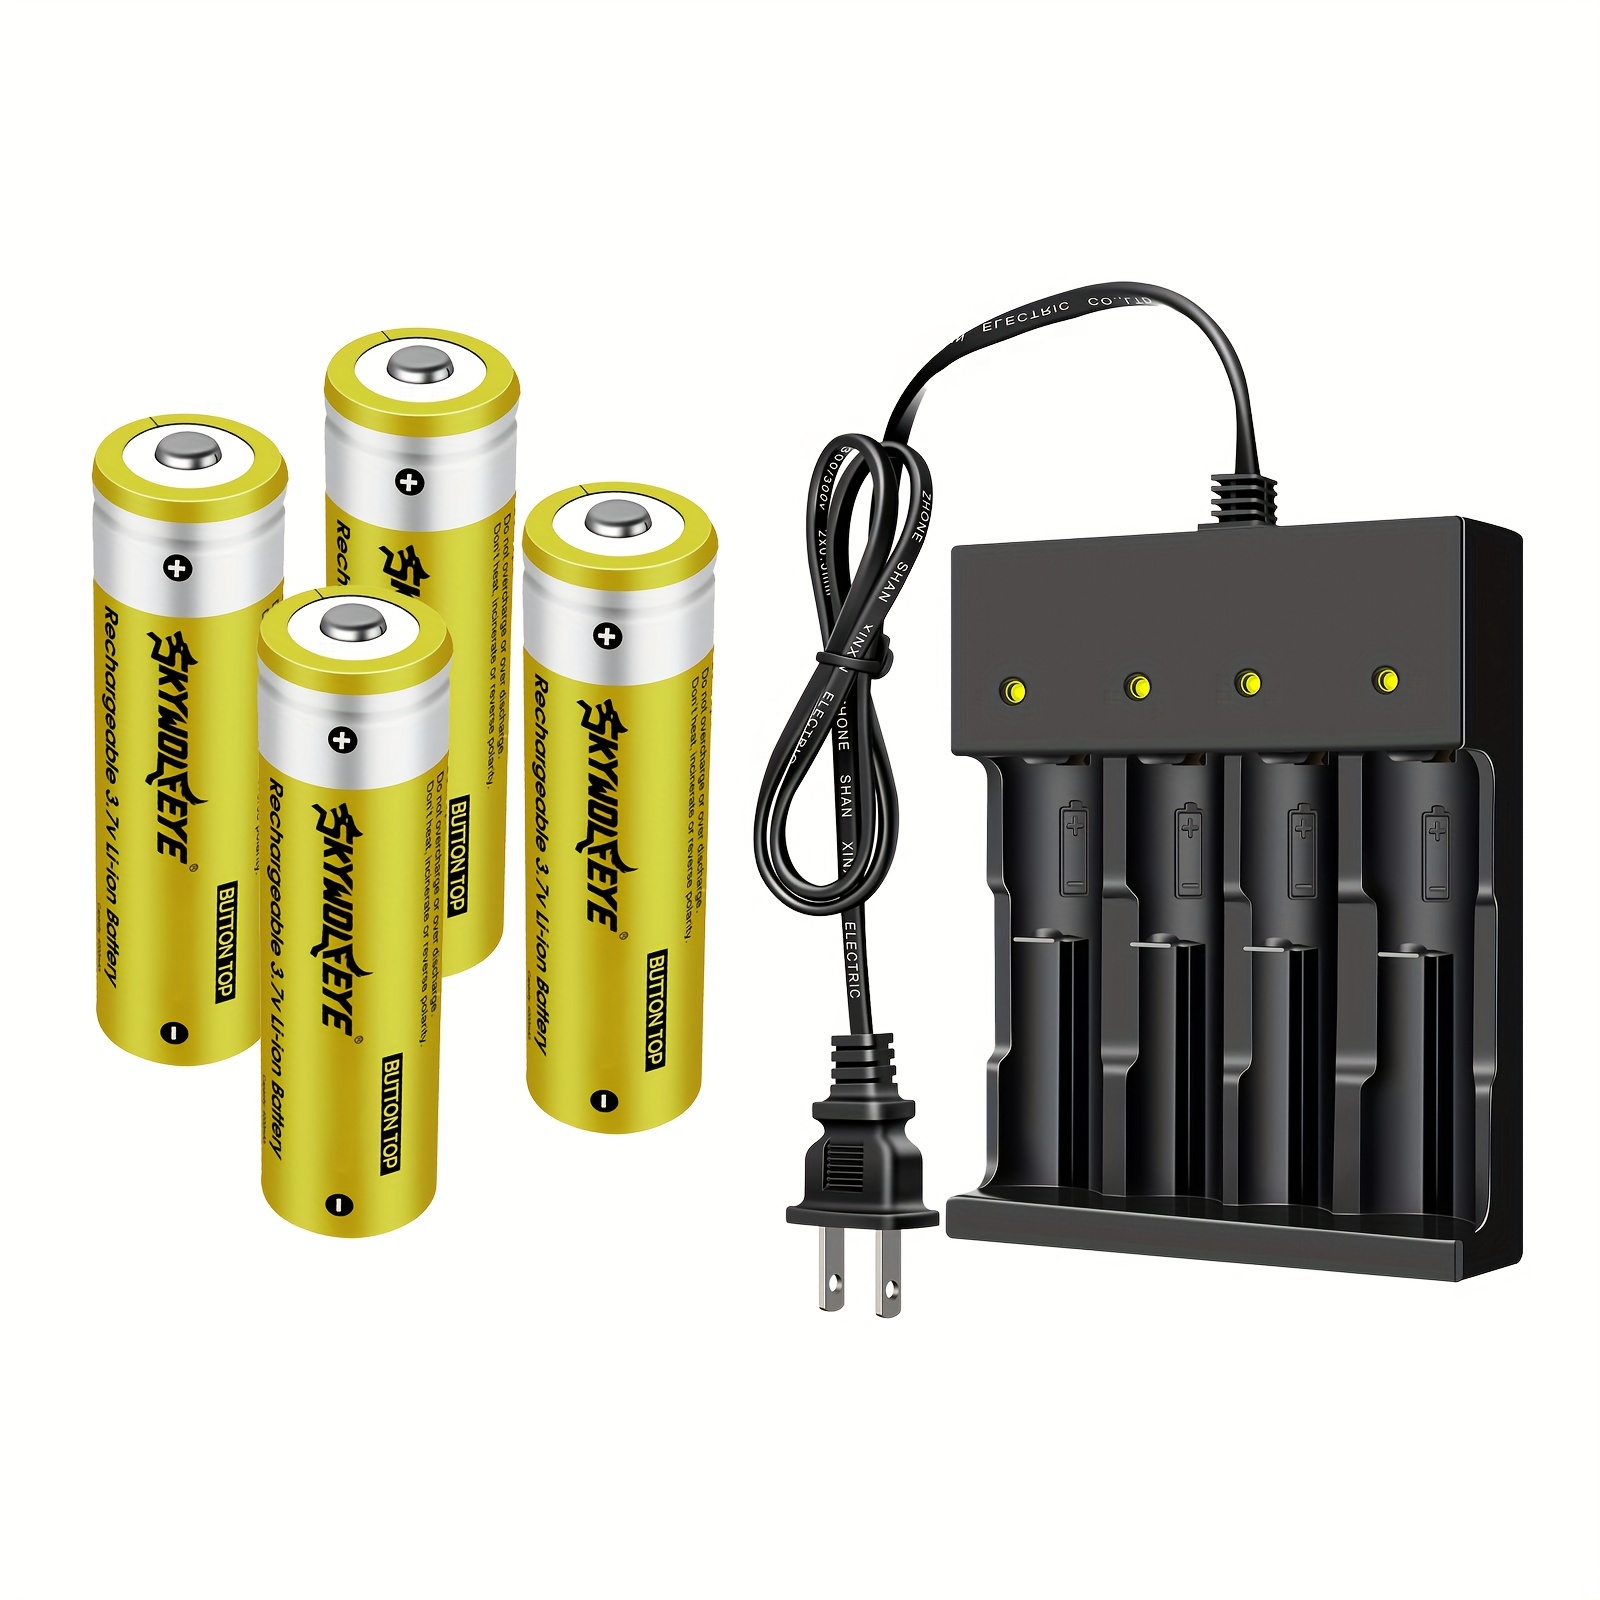 

6-slot Battery Charger With 6pcs 18650 Li-ion Rechargeable Batteries 3000mah Button Top Battery 3.7v Rechargeable Batteries For Headlamp Flashlight